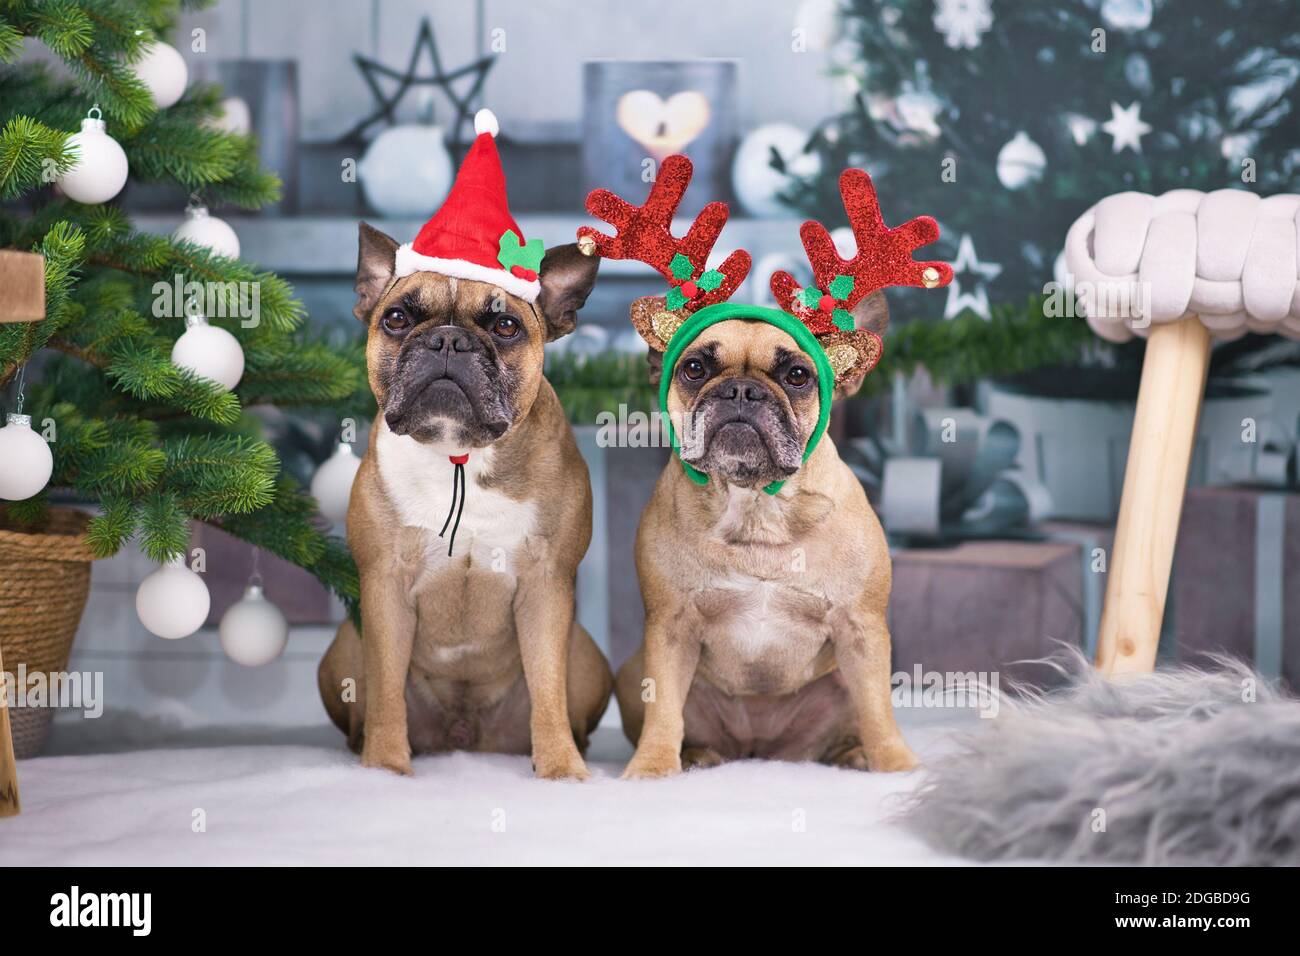 Christmas dogs. Pair of French Bulldogs dressed up with festive Santa hat and reindeer antler headband sitting between Christmas tree with baubles Stock Photo